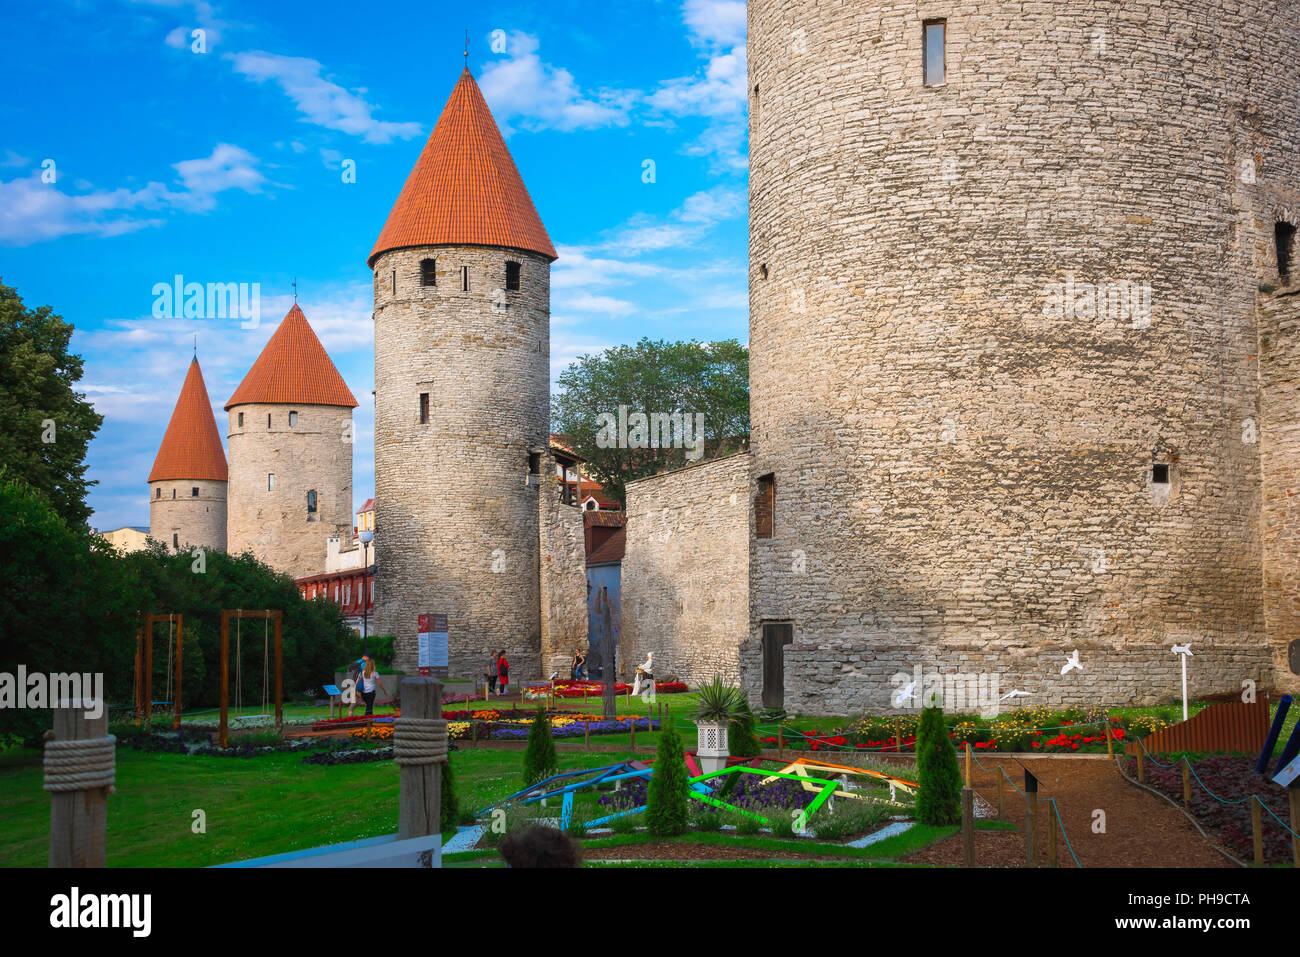 Tallinn wall, view across the city park and gardens towards the Lower Town Wall linking a series of medieval towers in the centre of Tallinn, Estonia. Stock Photo